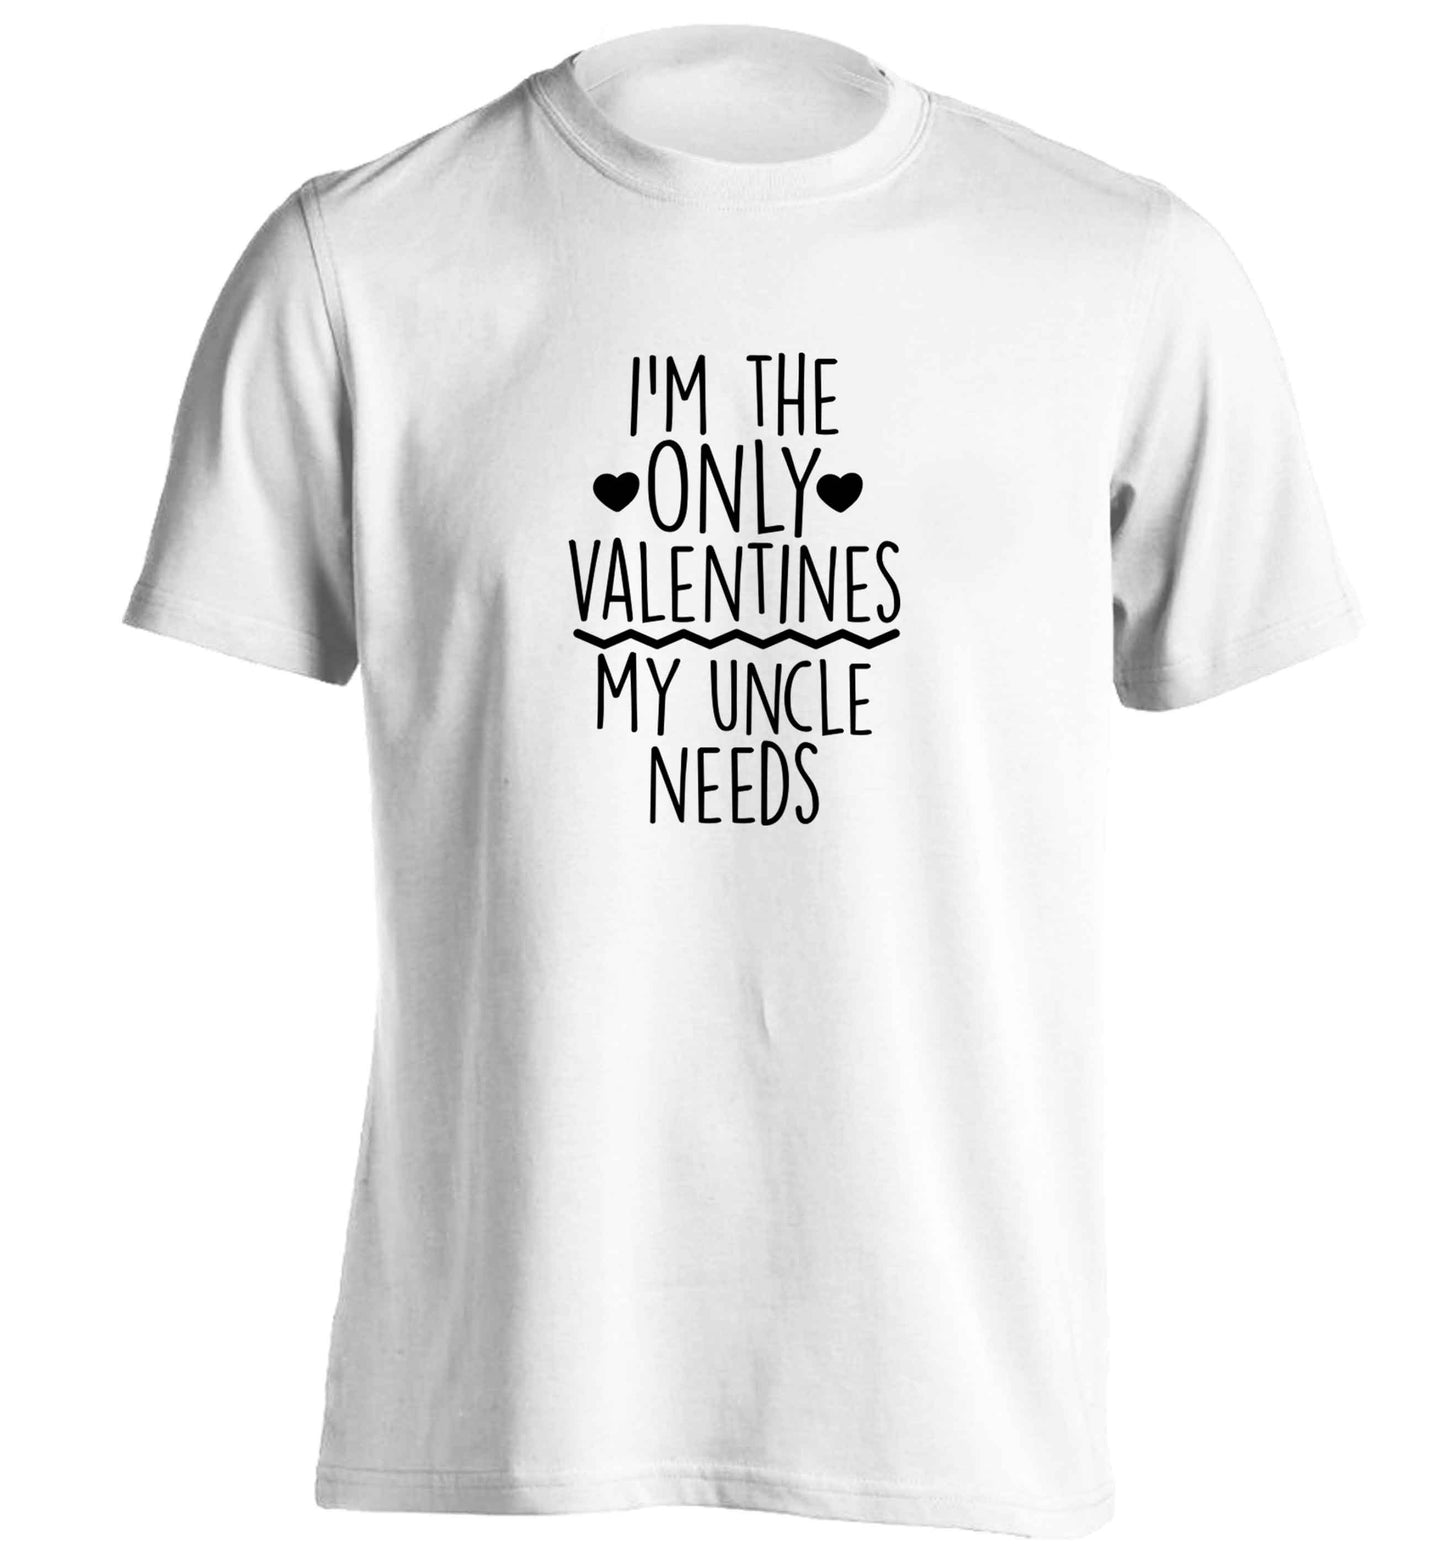 I'm the only valentines my uncle needs adults unisex white Tshirt 2XL